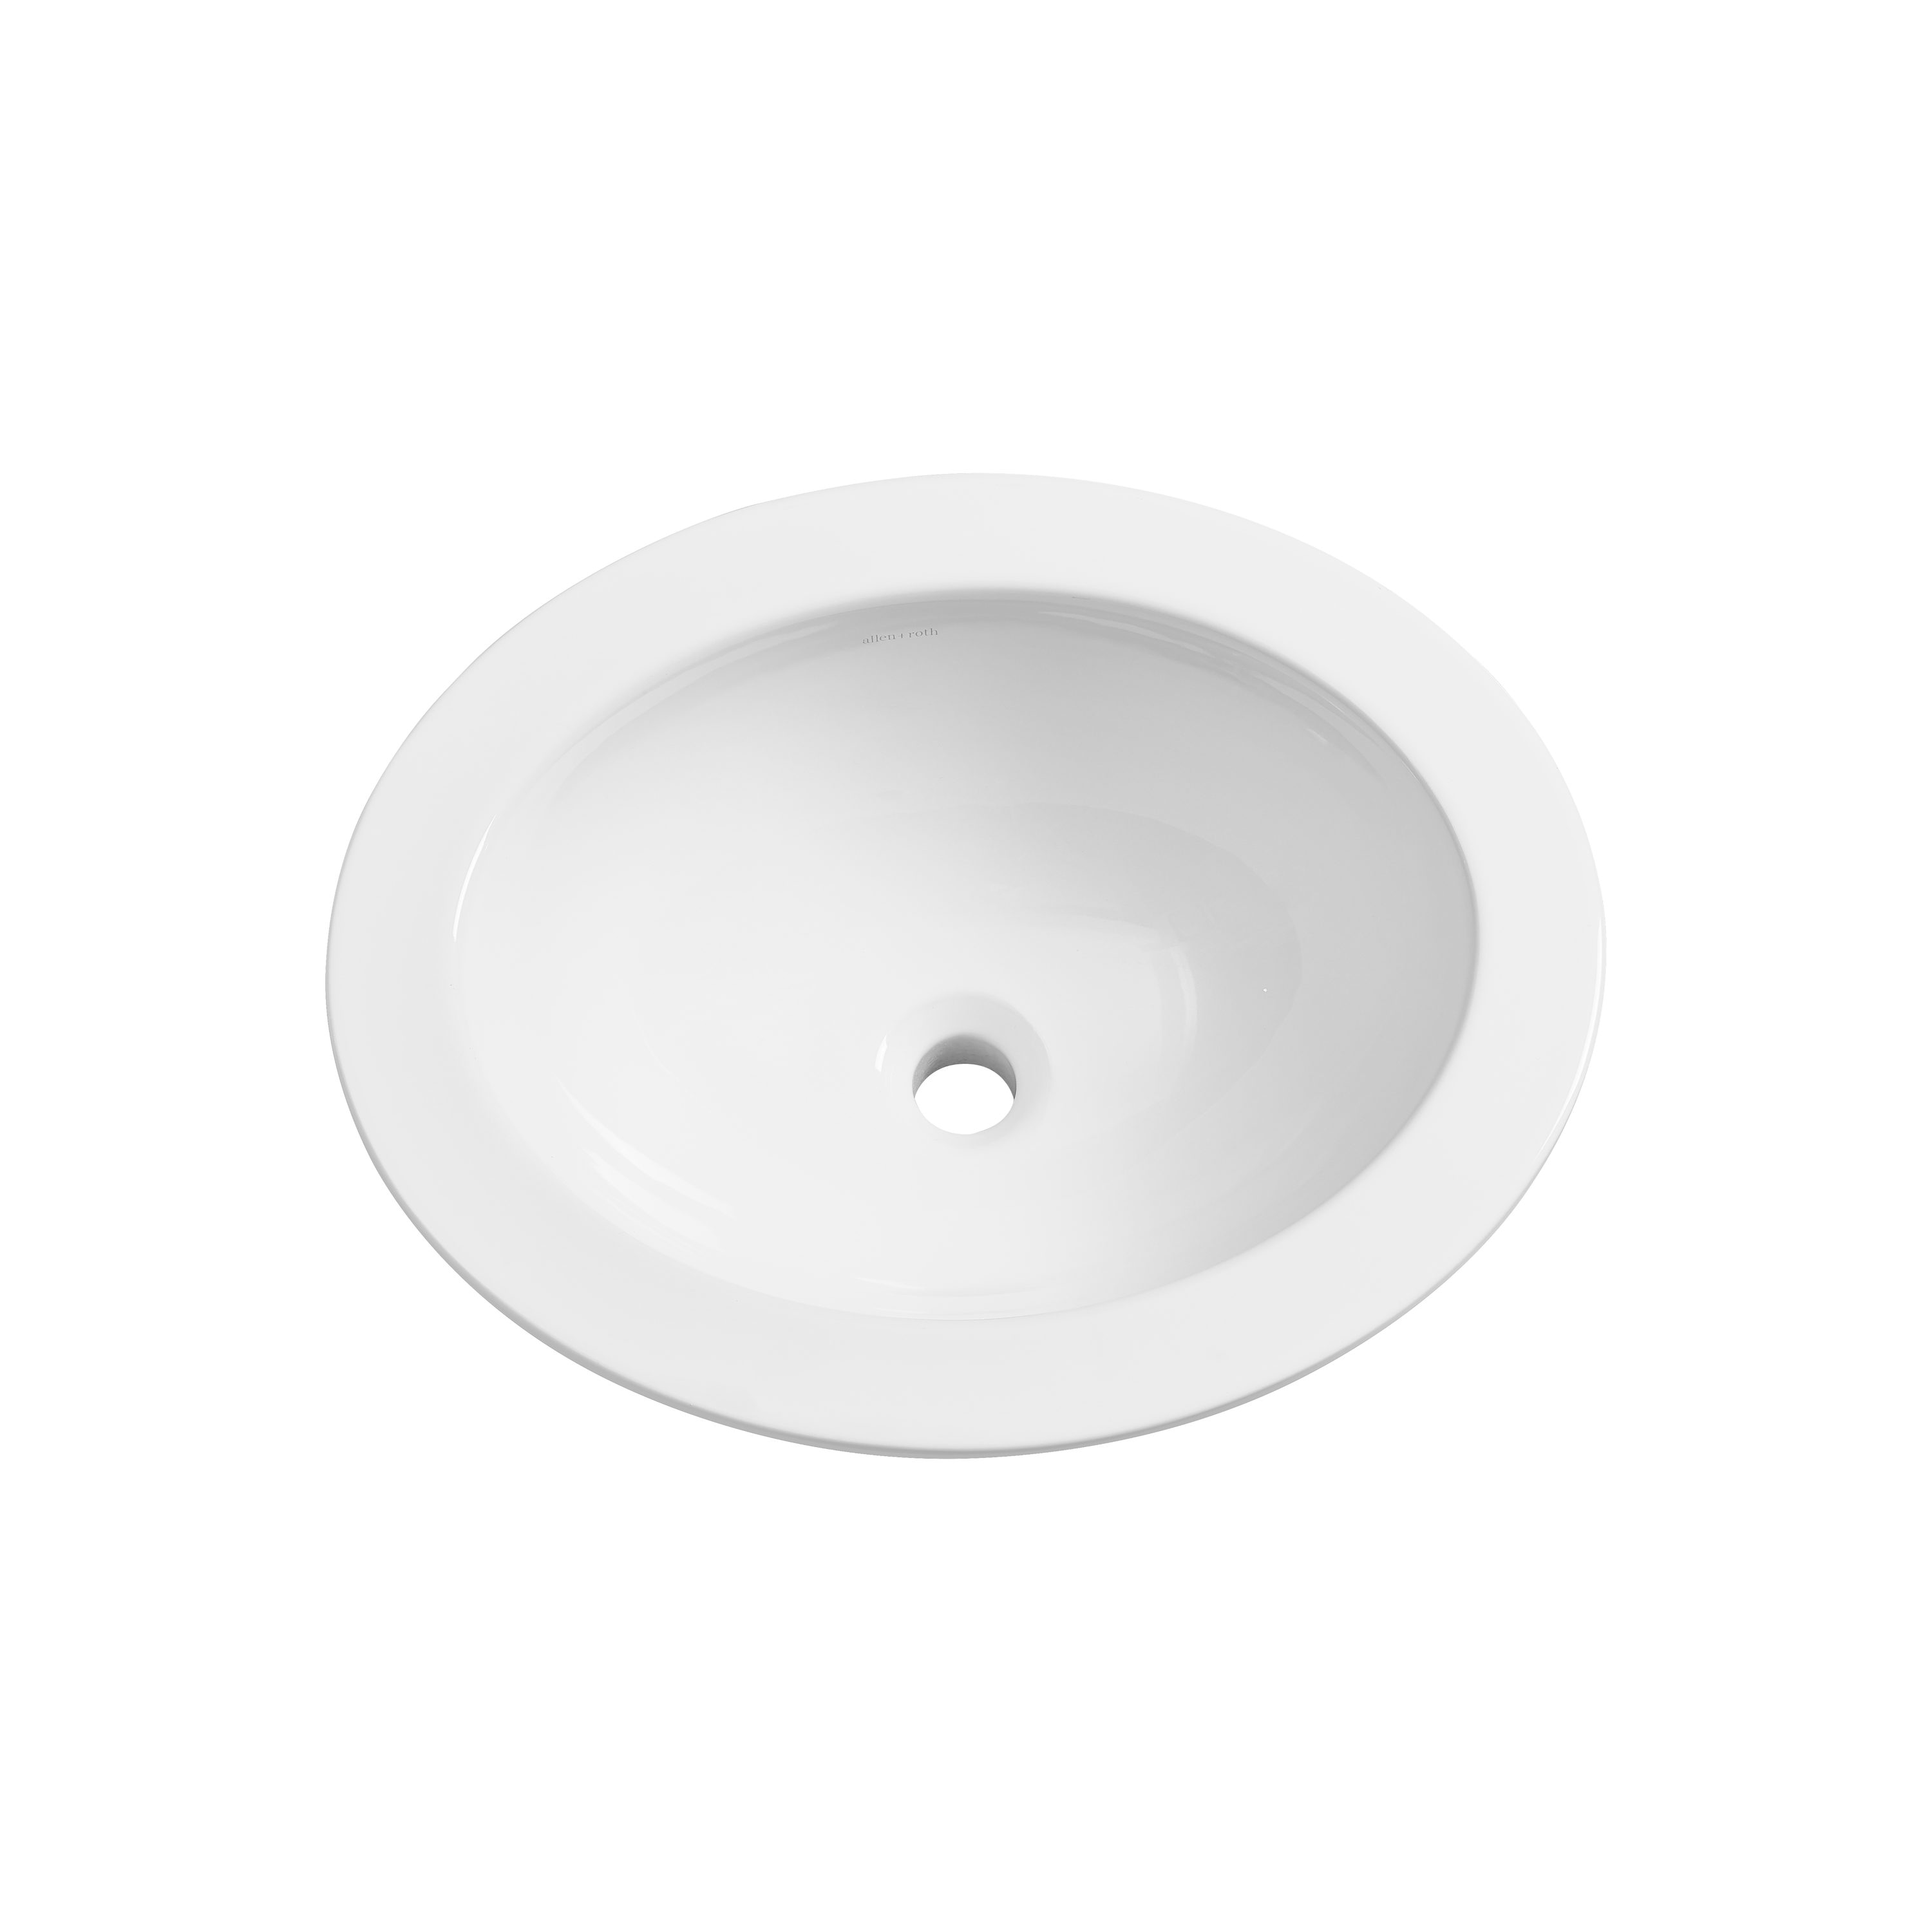 16.5-in. W CSA Oval Undermount Sink Set in White - Chrome Hardware - Overflow Drain Incl.